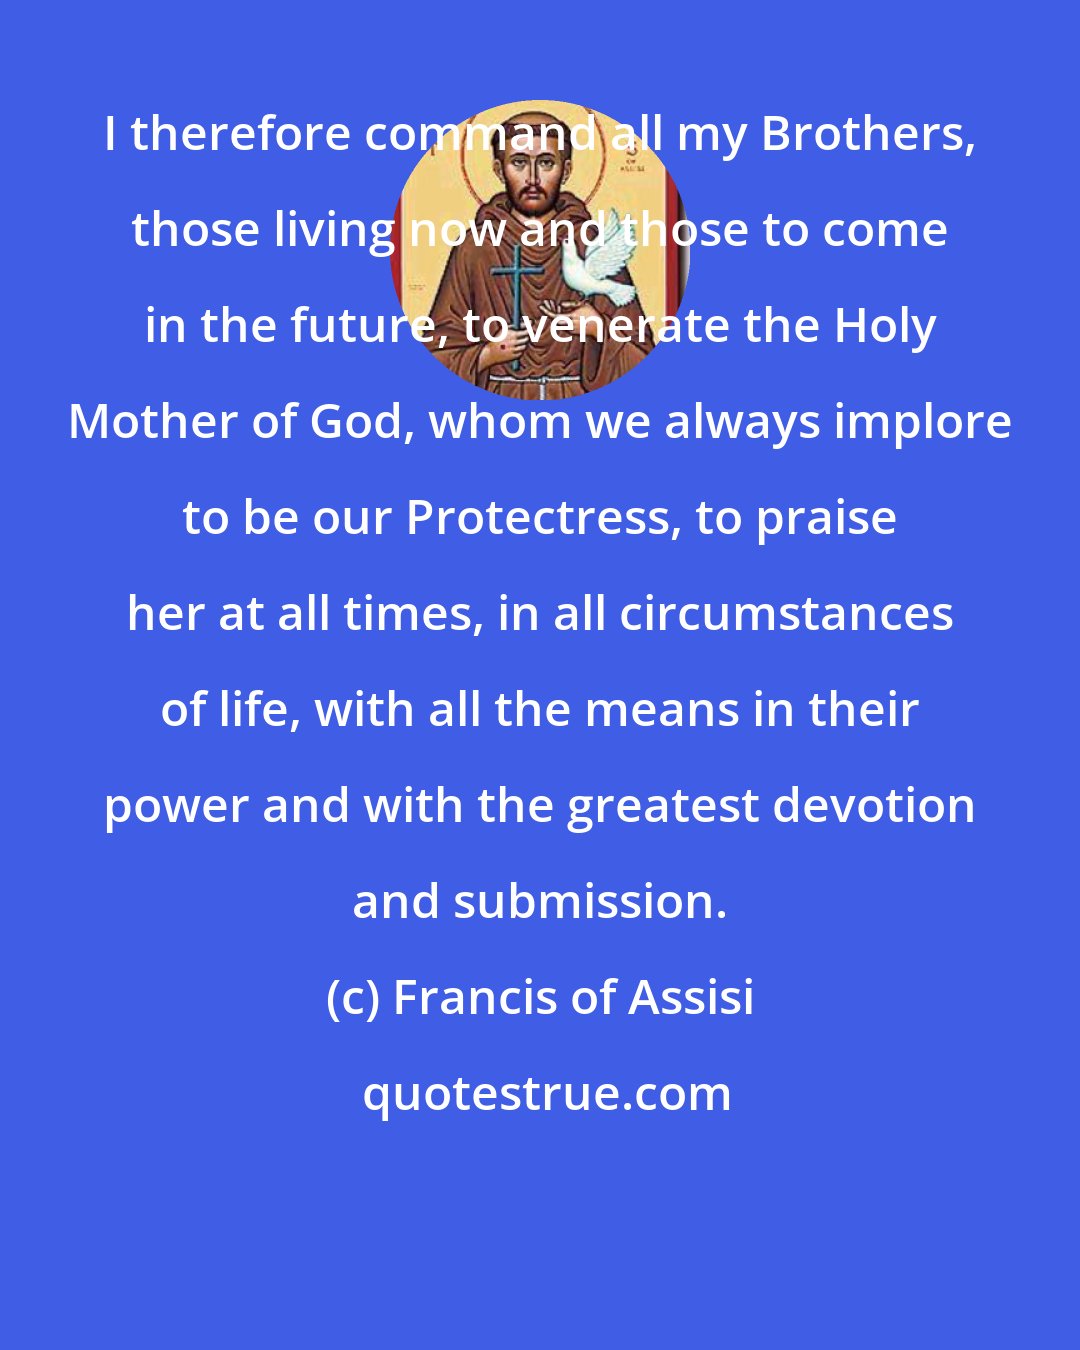 Francis of Assisi: I therefore command all my Brothers, those living now and those to come in the future, to venerate the Holy Mother of God, whom we always implore to be our Protectress, to praise her at all times, in all circumstances of life, with all the means in their power and with the greatest devotion and submission.